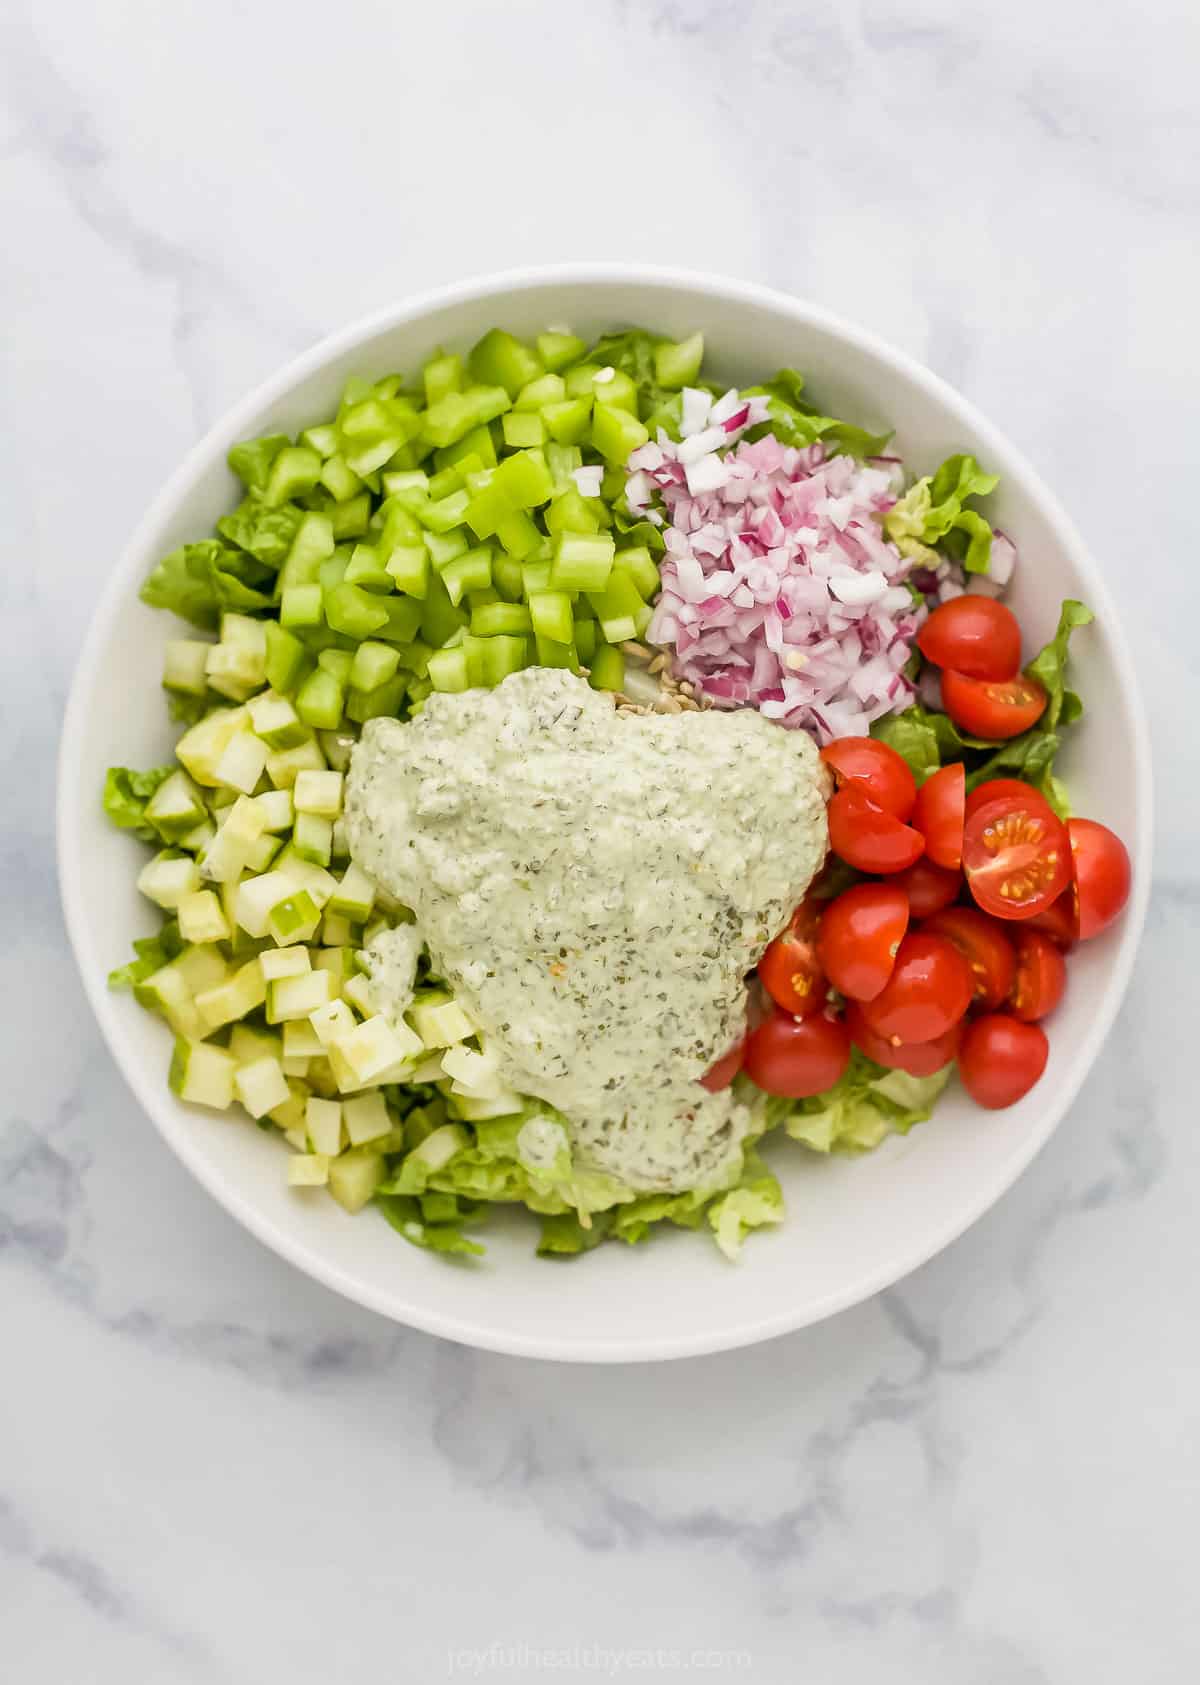 A big bowl of salad sitting on a white and gray marble surface